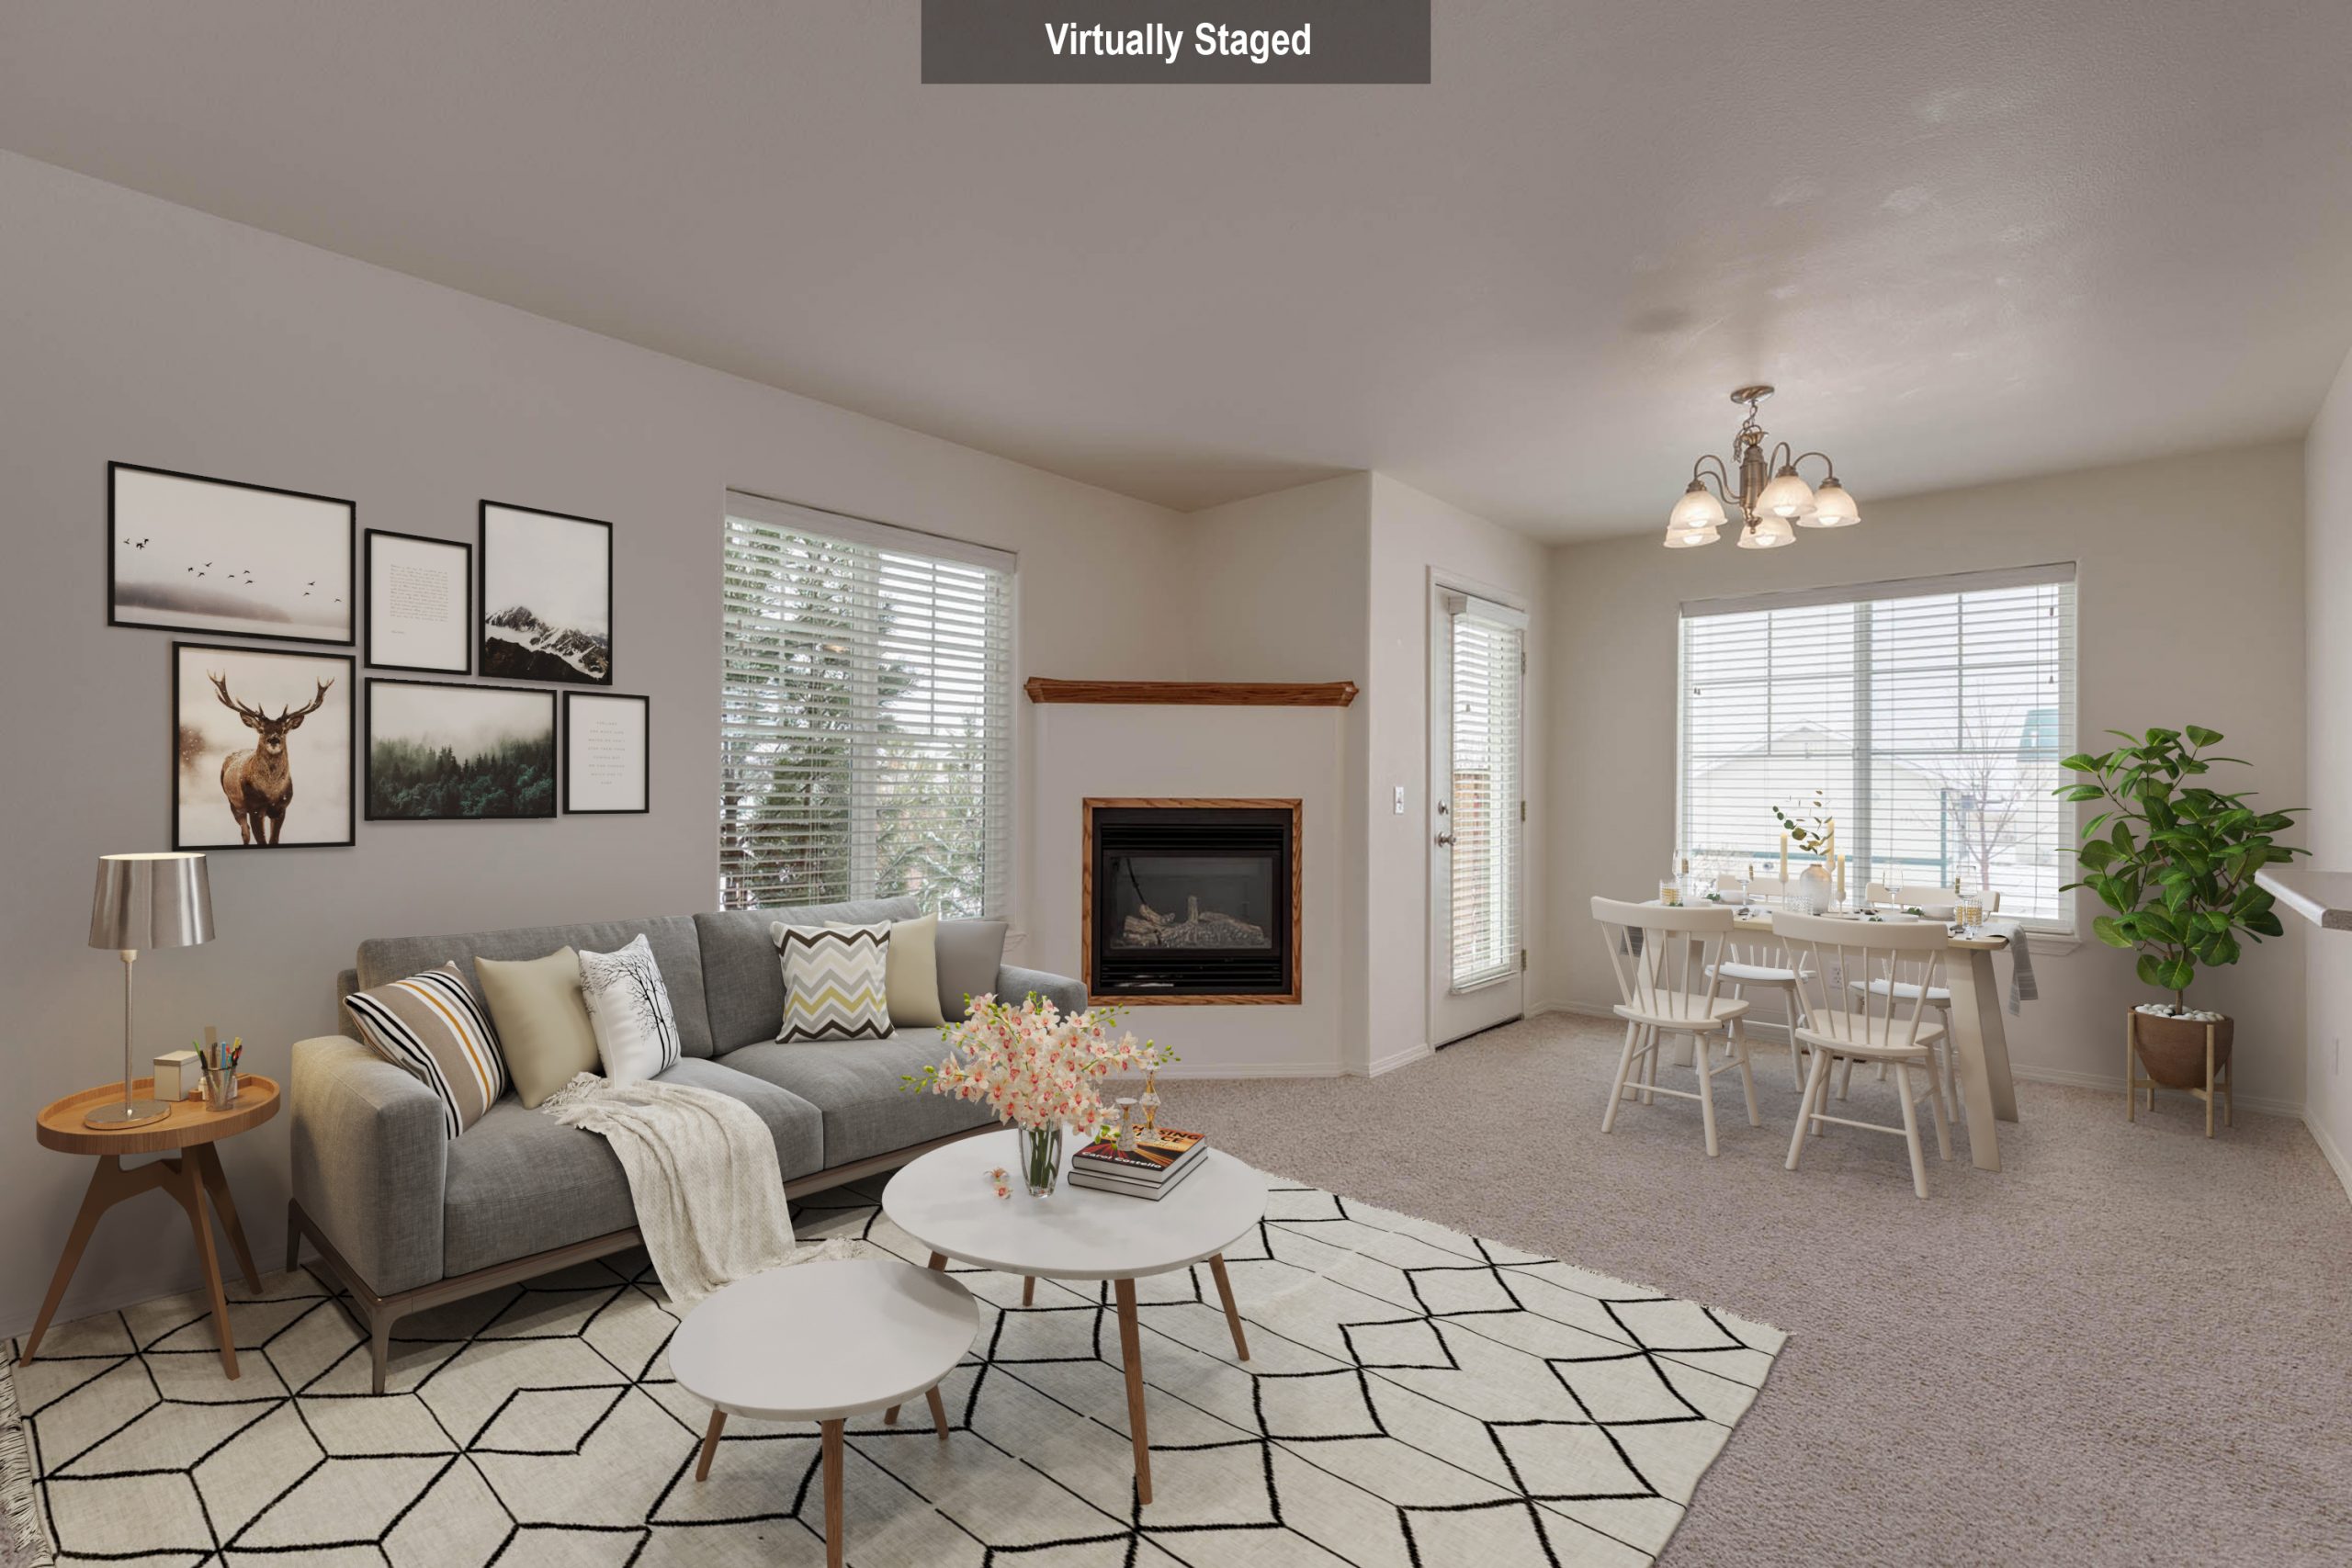 virtually staged living room